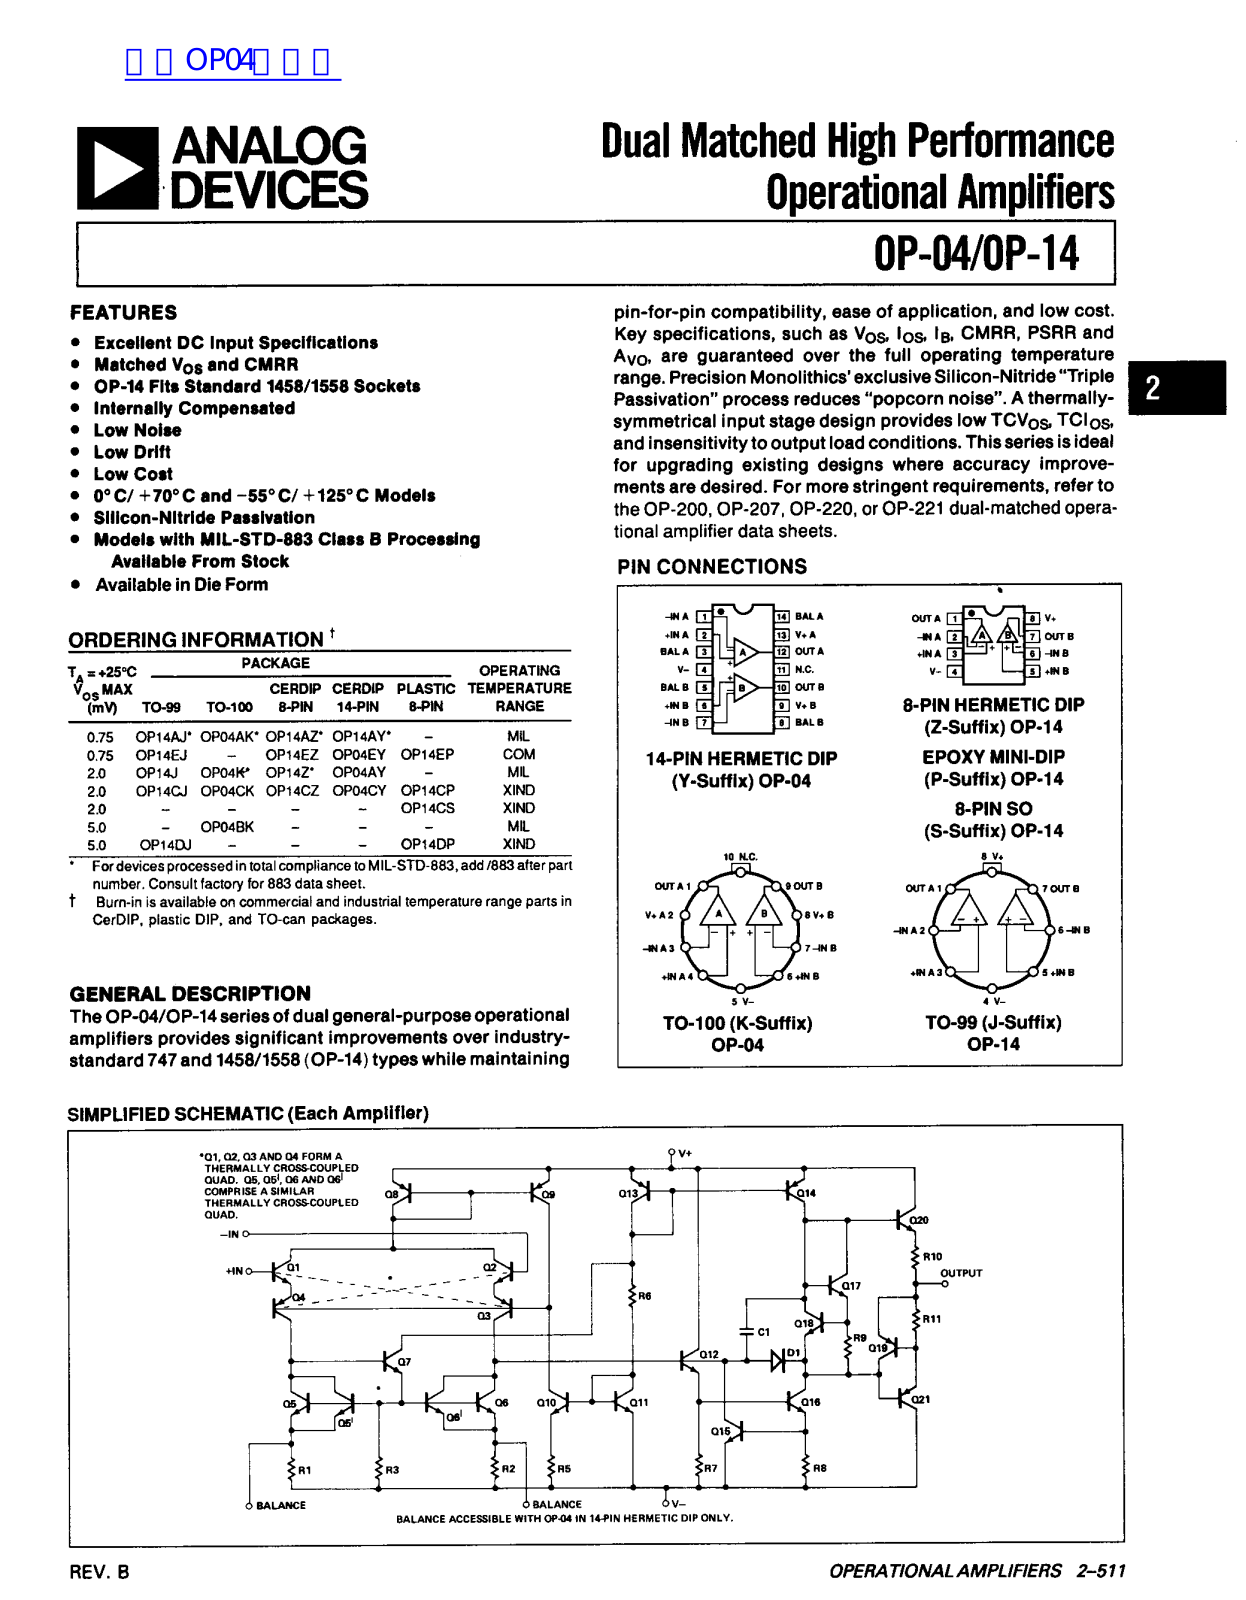 ANALOG DEVICES OP-04, OP-14 Service Manual